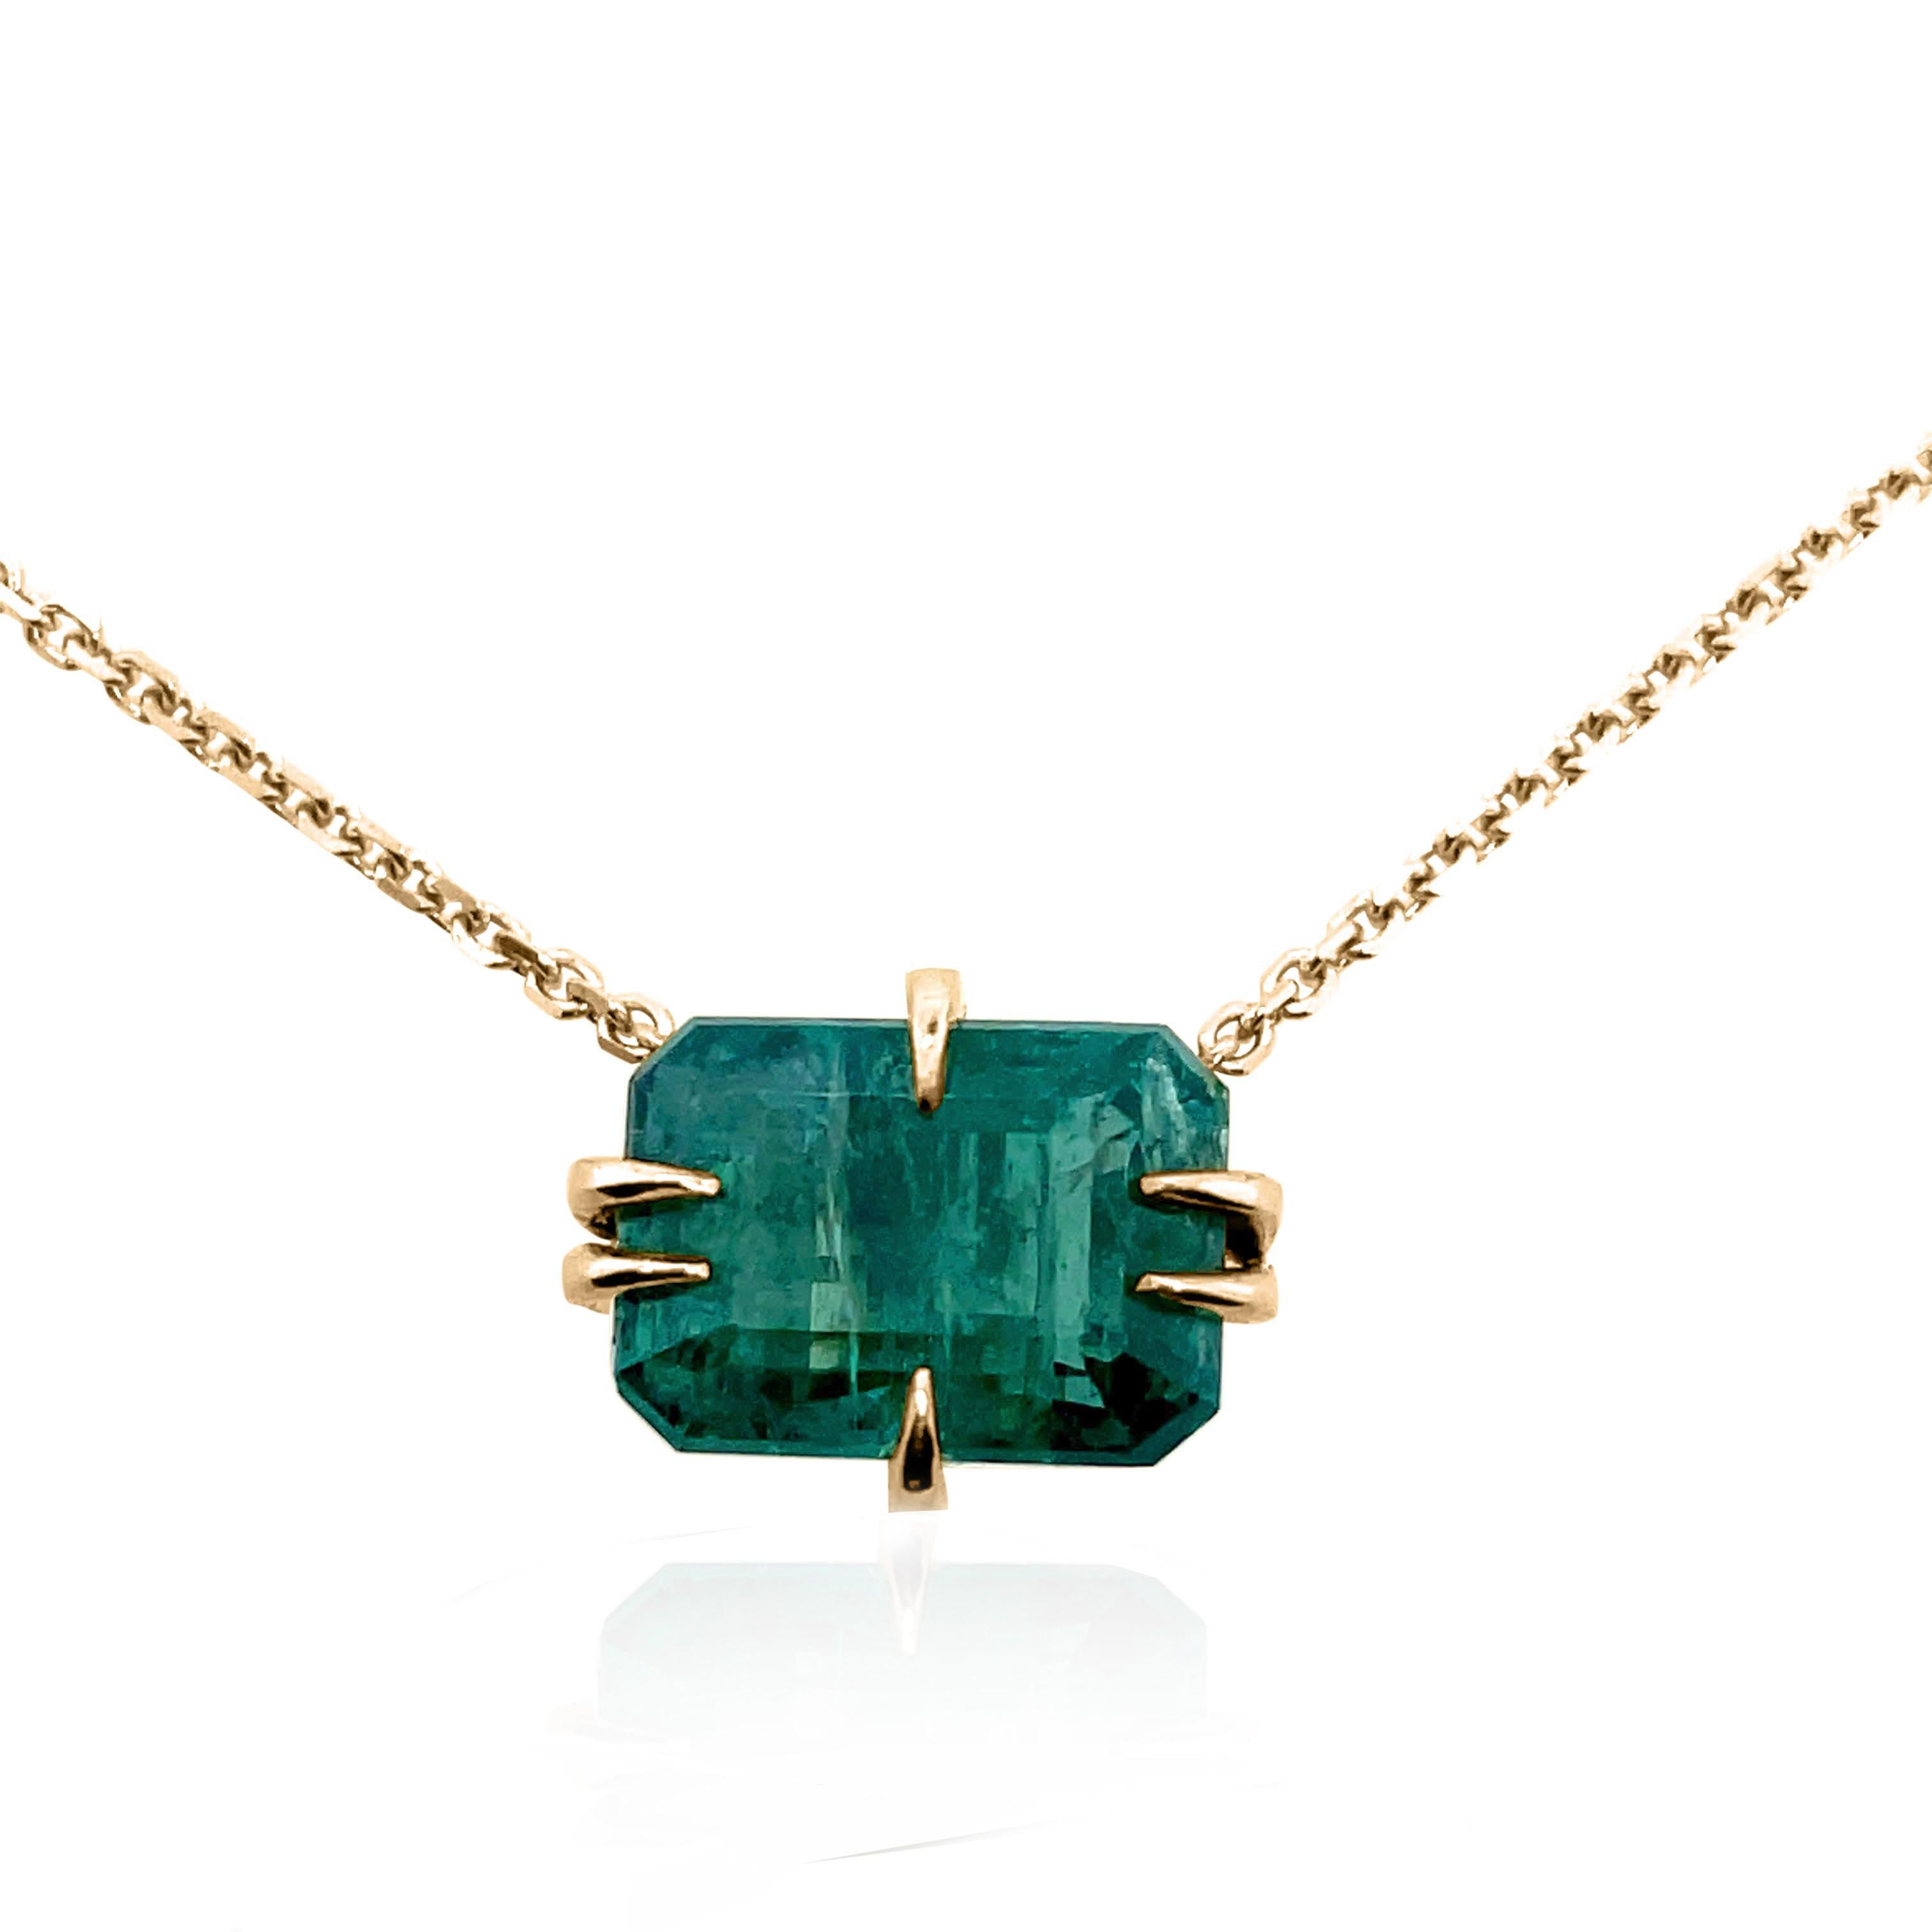 3.50ct Emerald necklace made in 18k yellow gold with chain For Sale